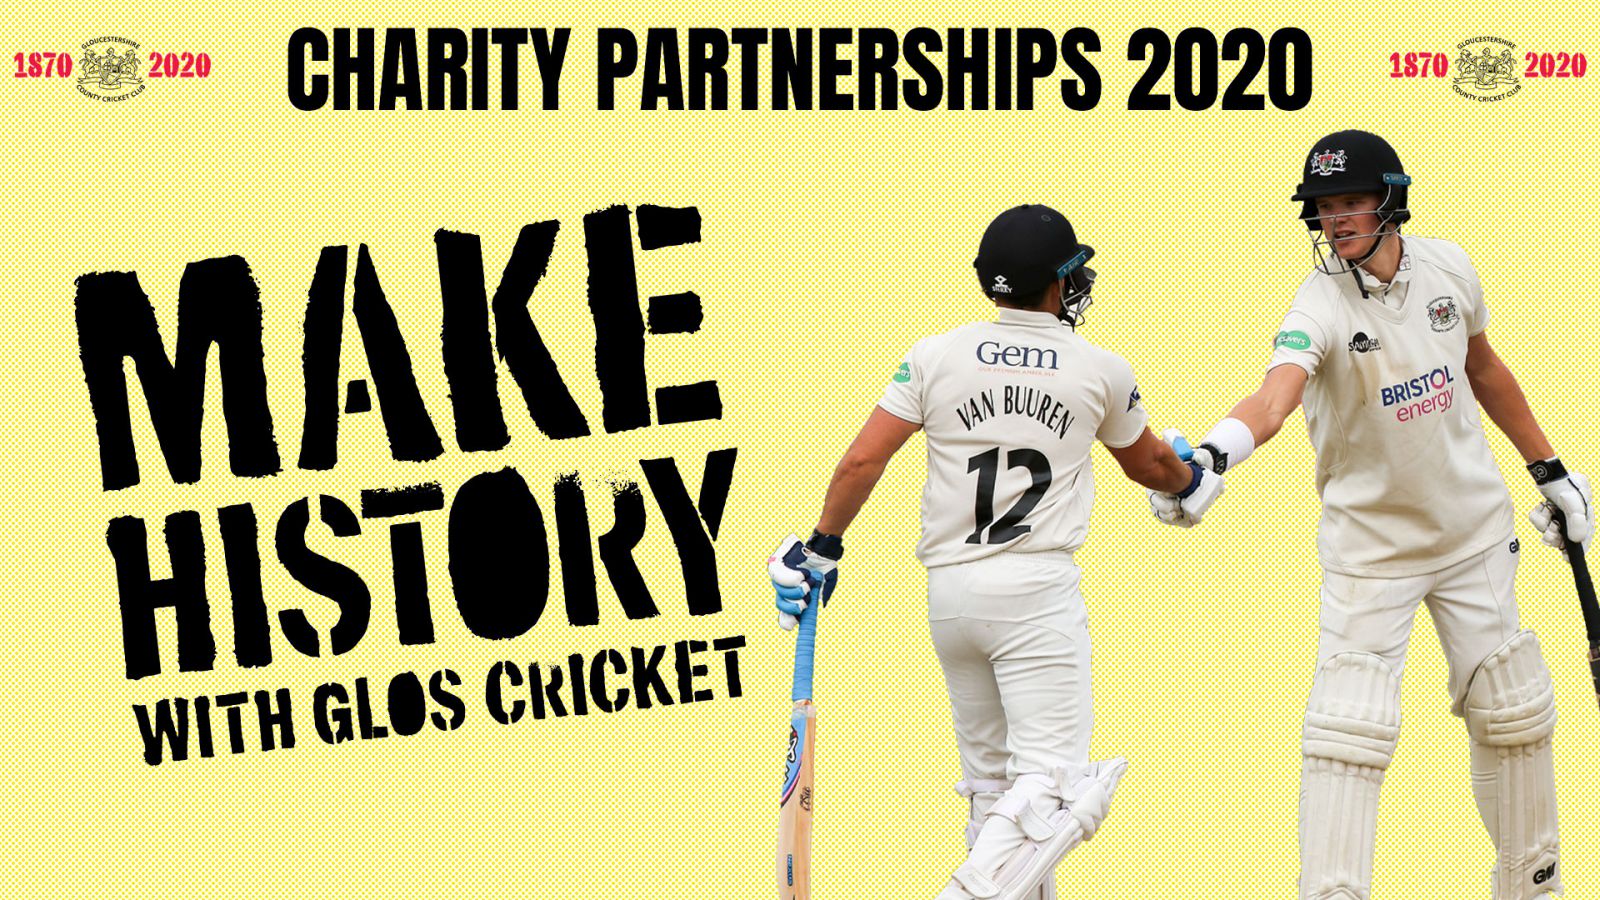 The GCCC Charity Partnership Programme.